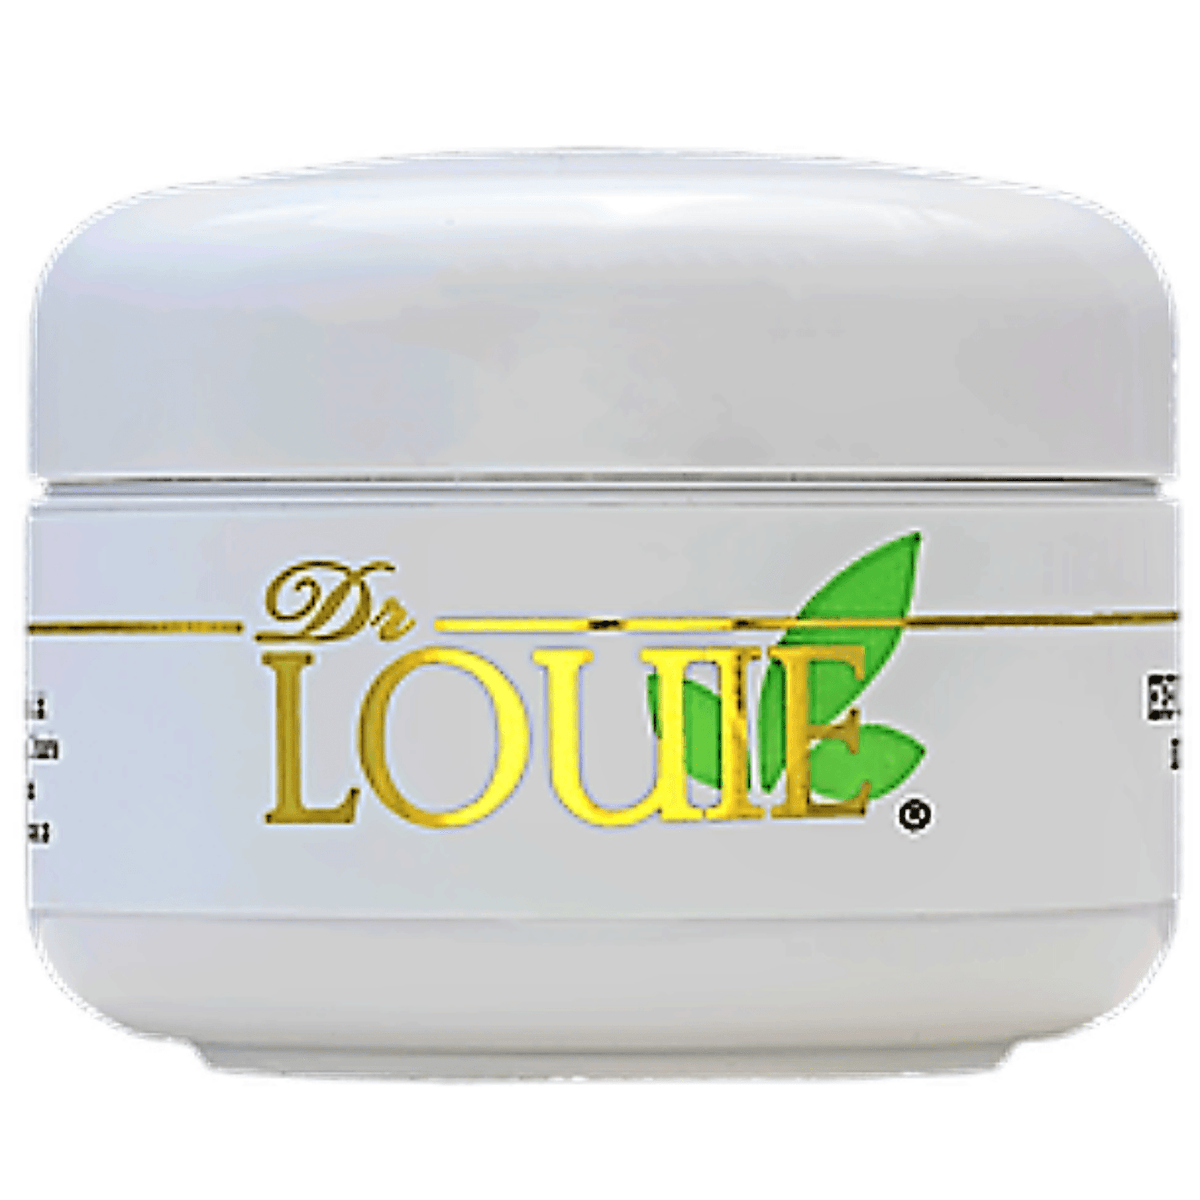 Dr. Louie Exfoliating Cleansing cream - 100gms Face Cleansers at Village Vitamin Store